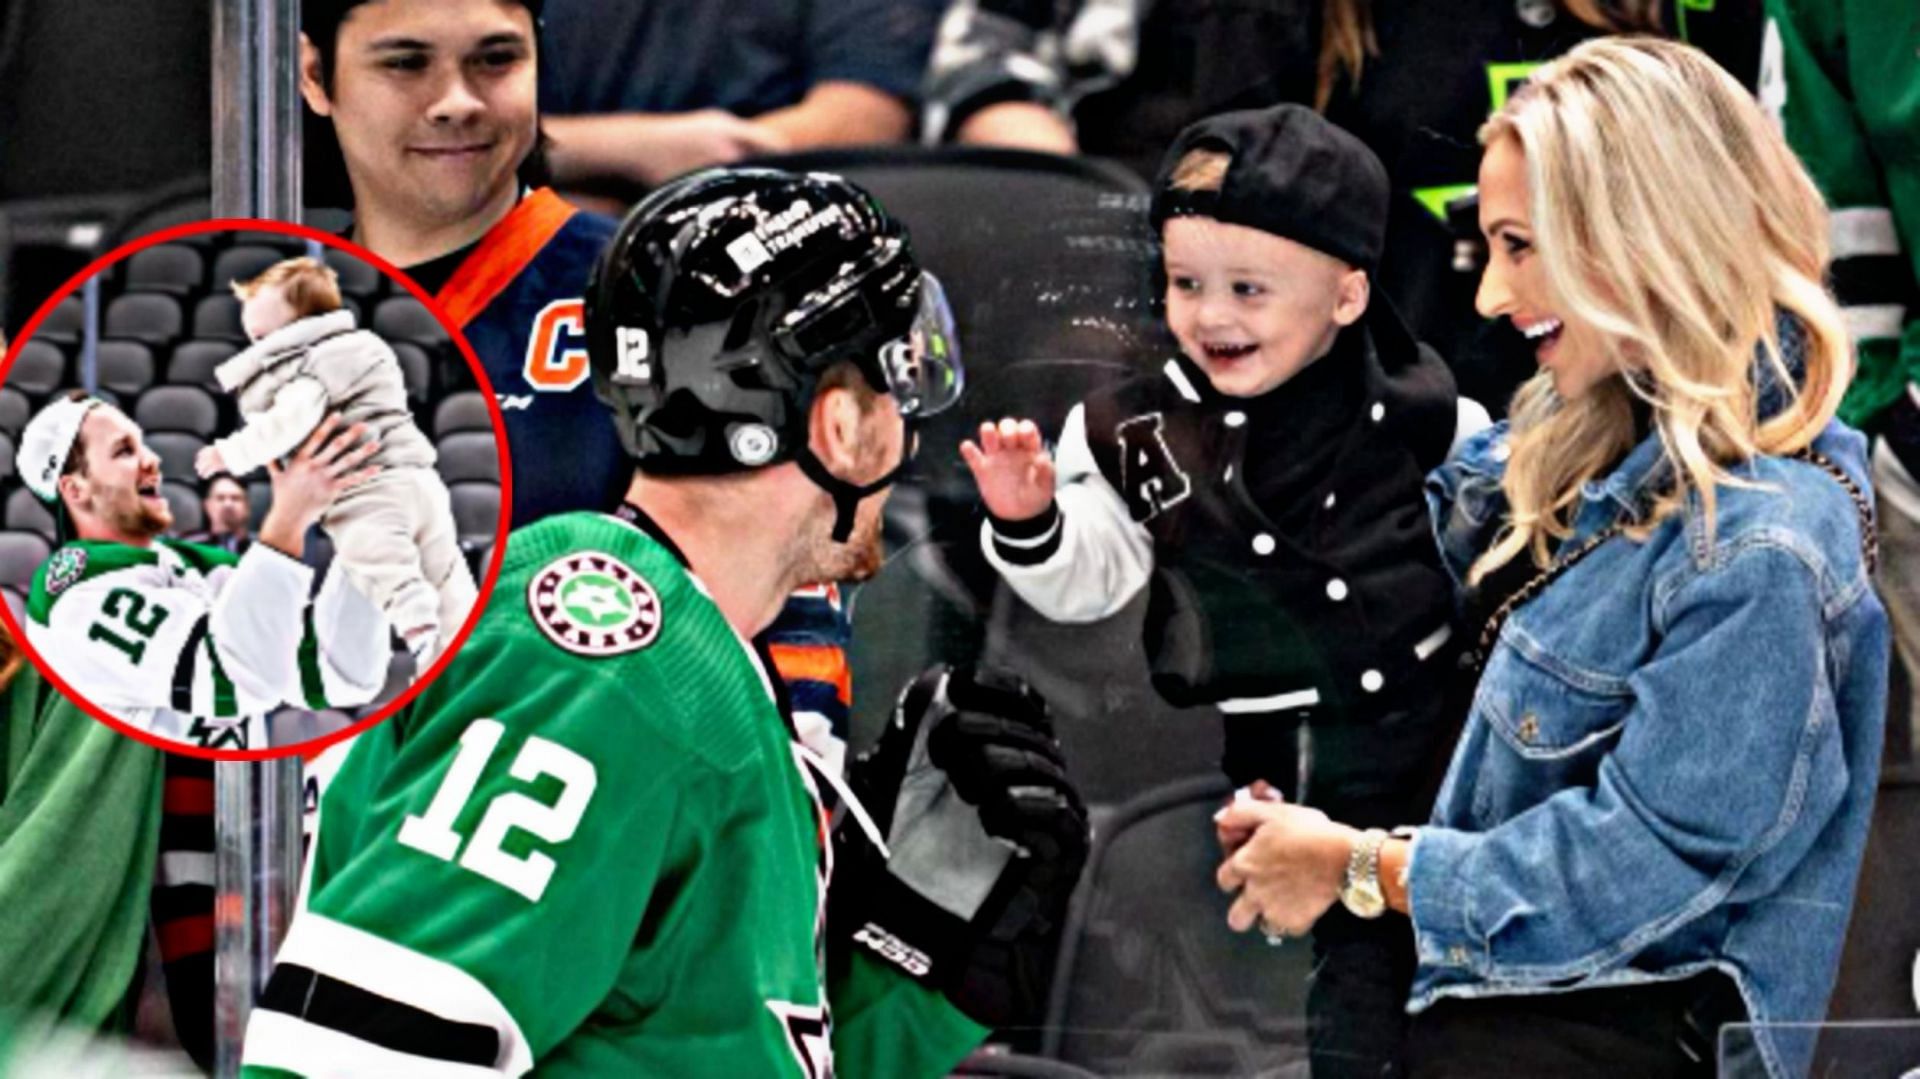 Radek Faksa shares a moment with his son